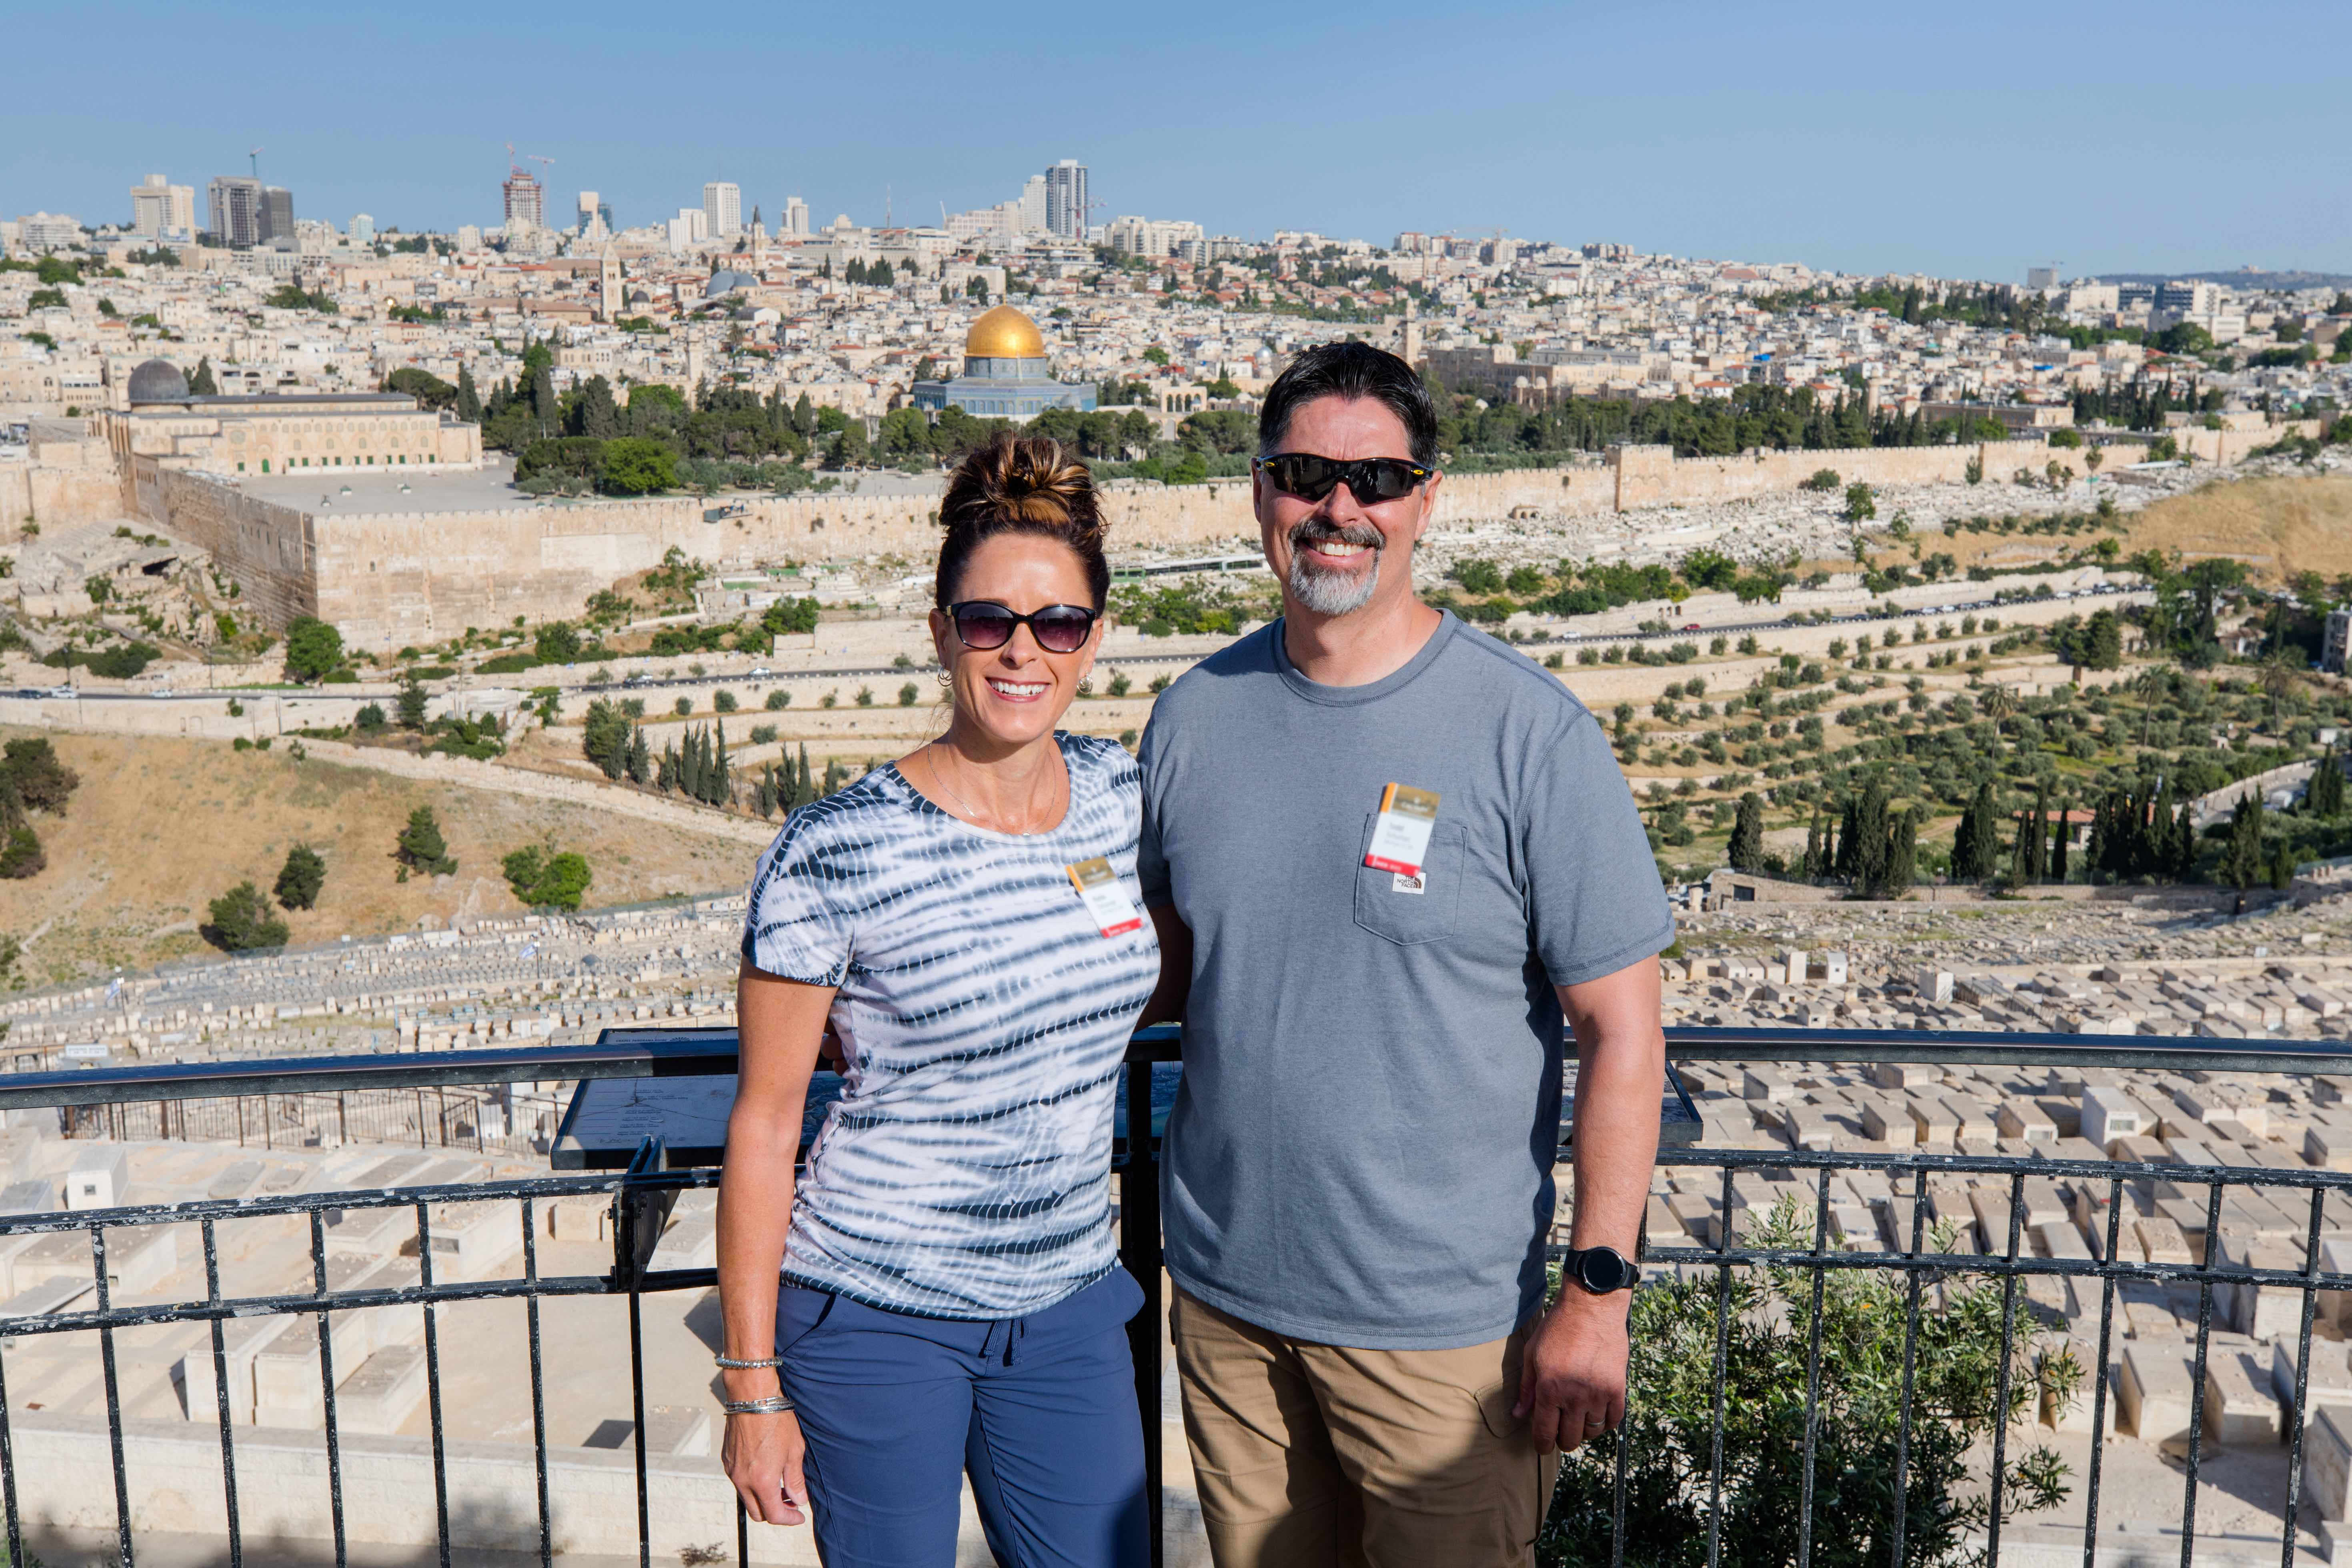 Vista overlooking the city of Jerusalem, perfect for photos